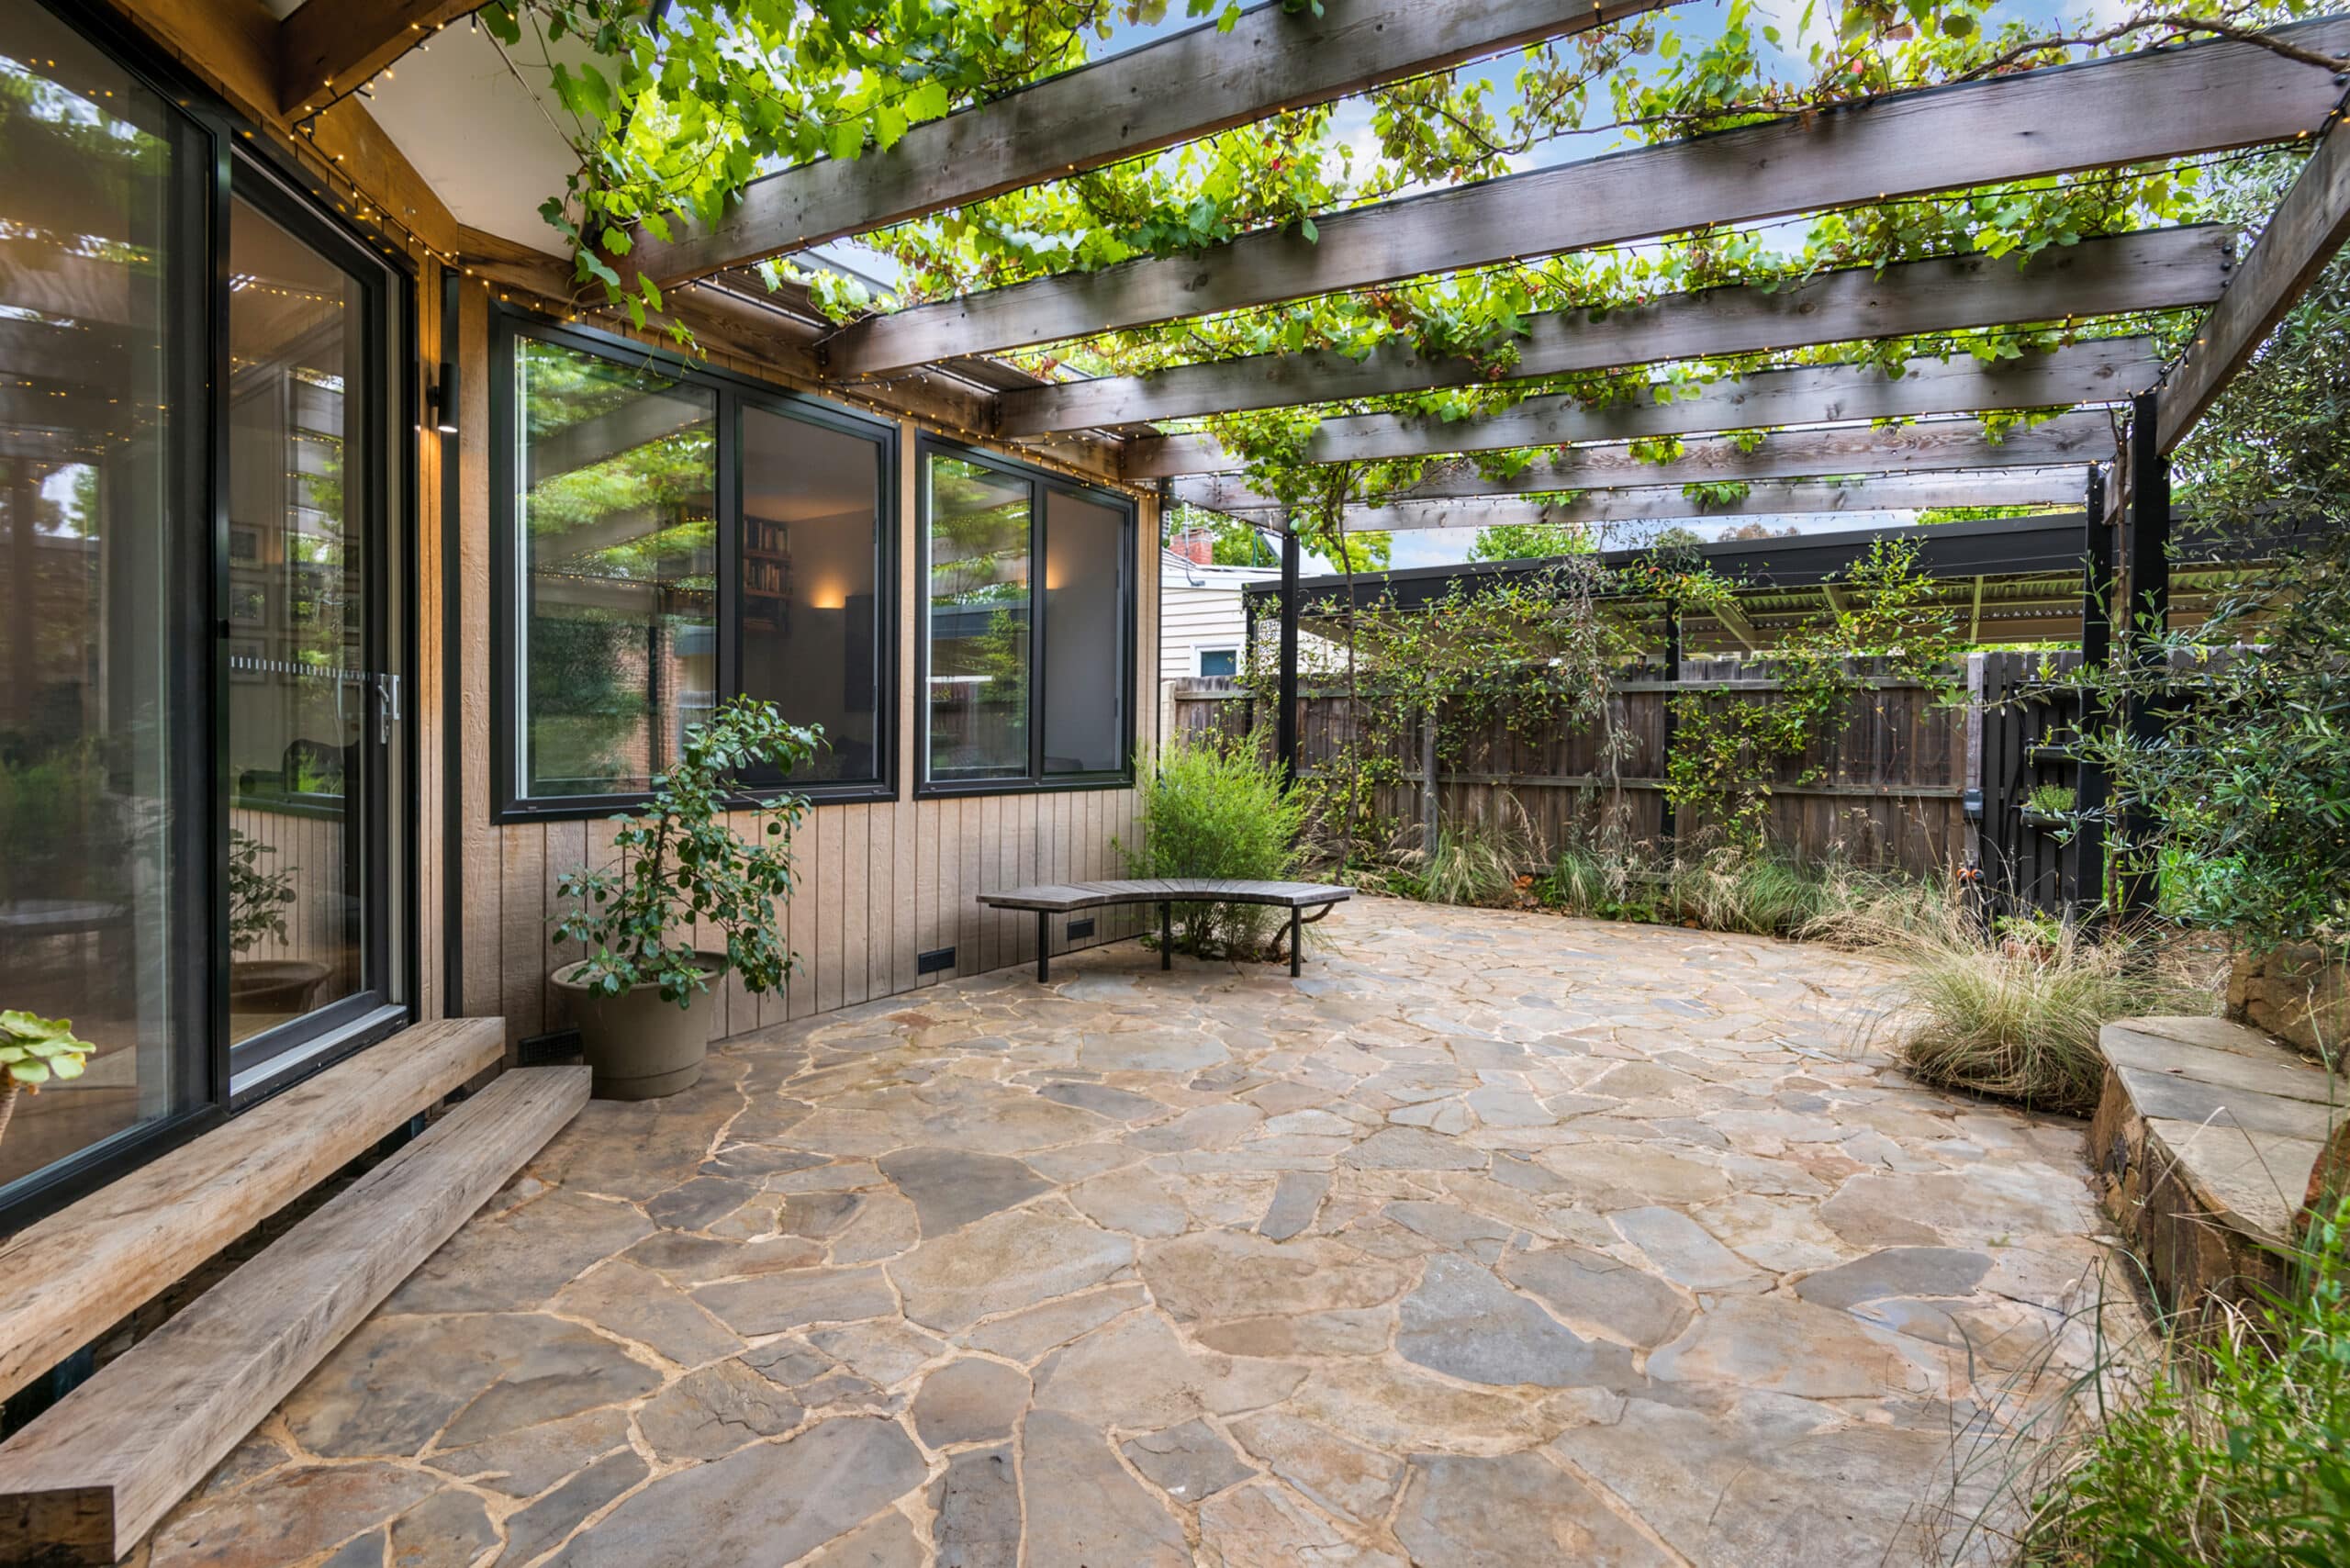 Outside area with stone floor and greenery